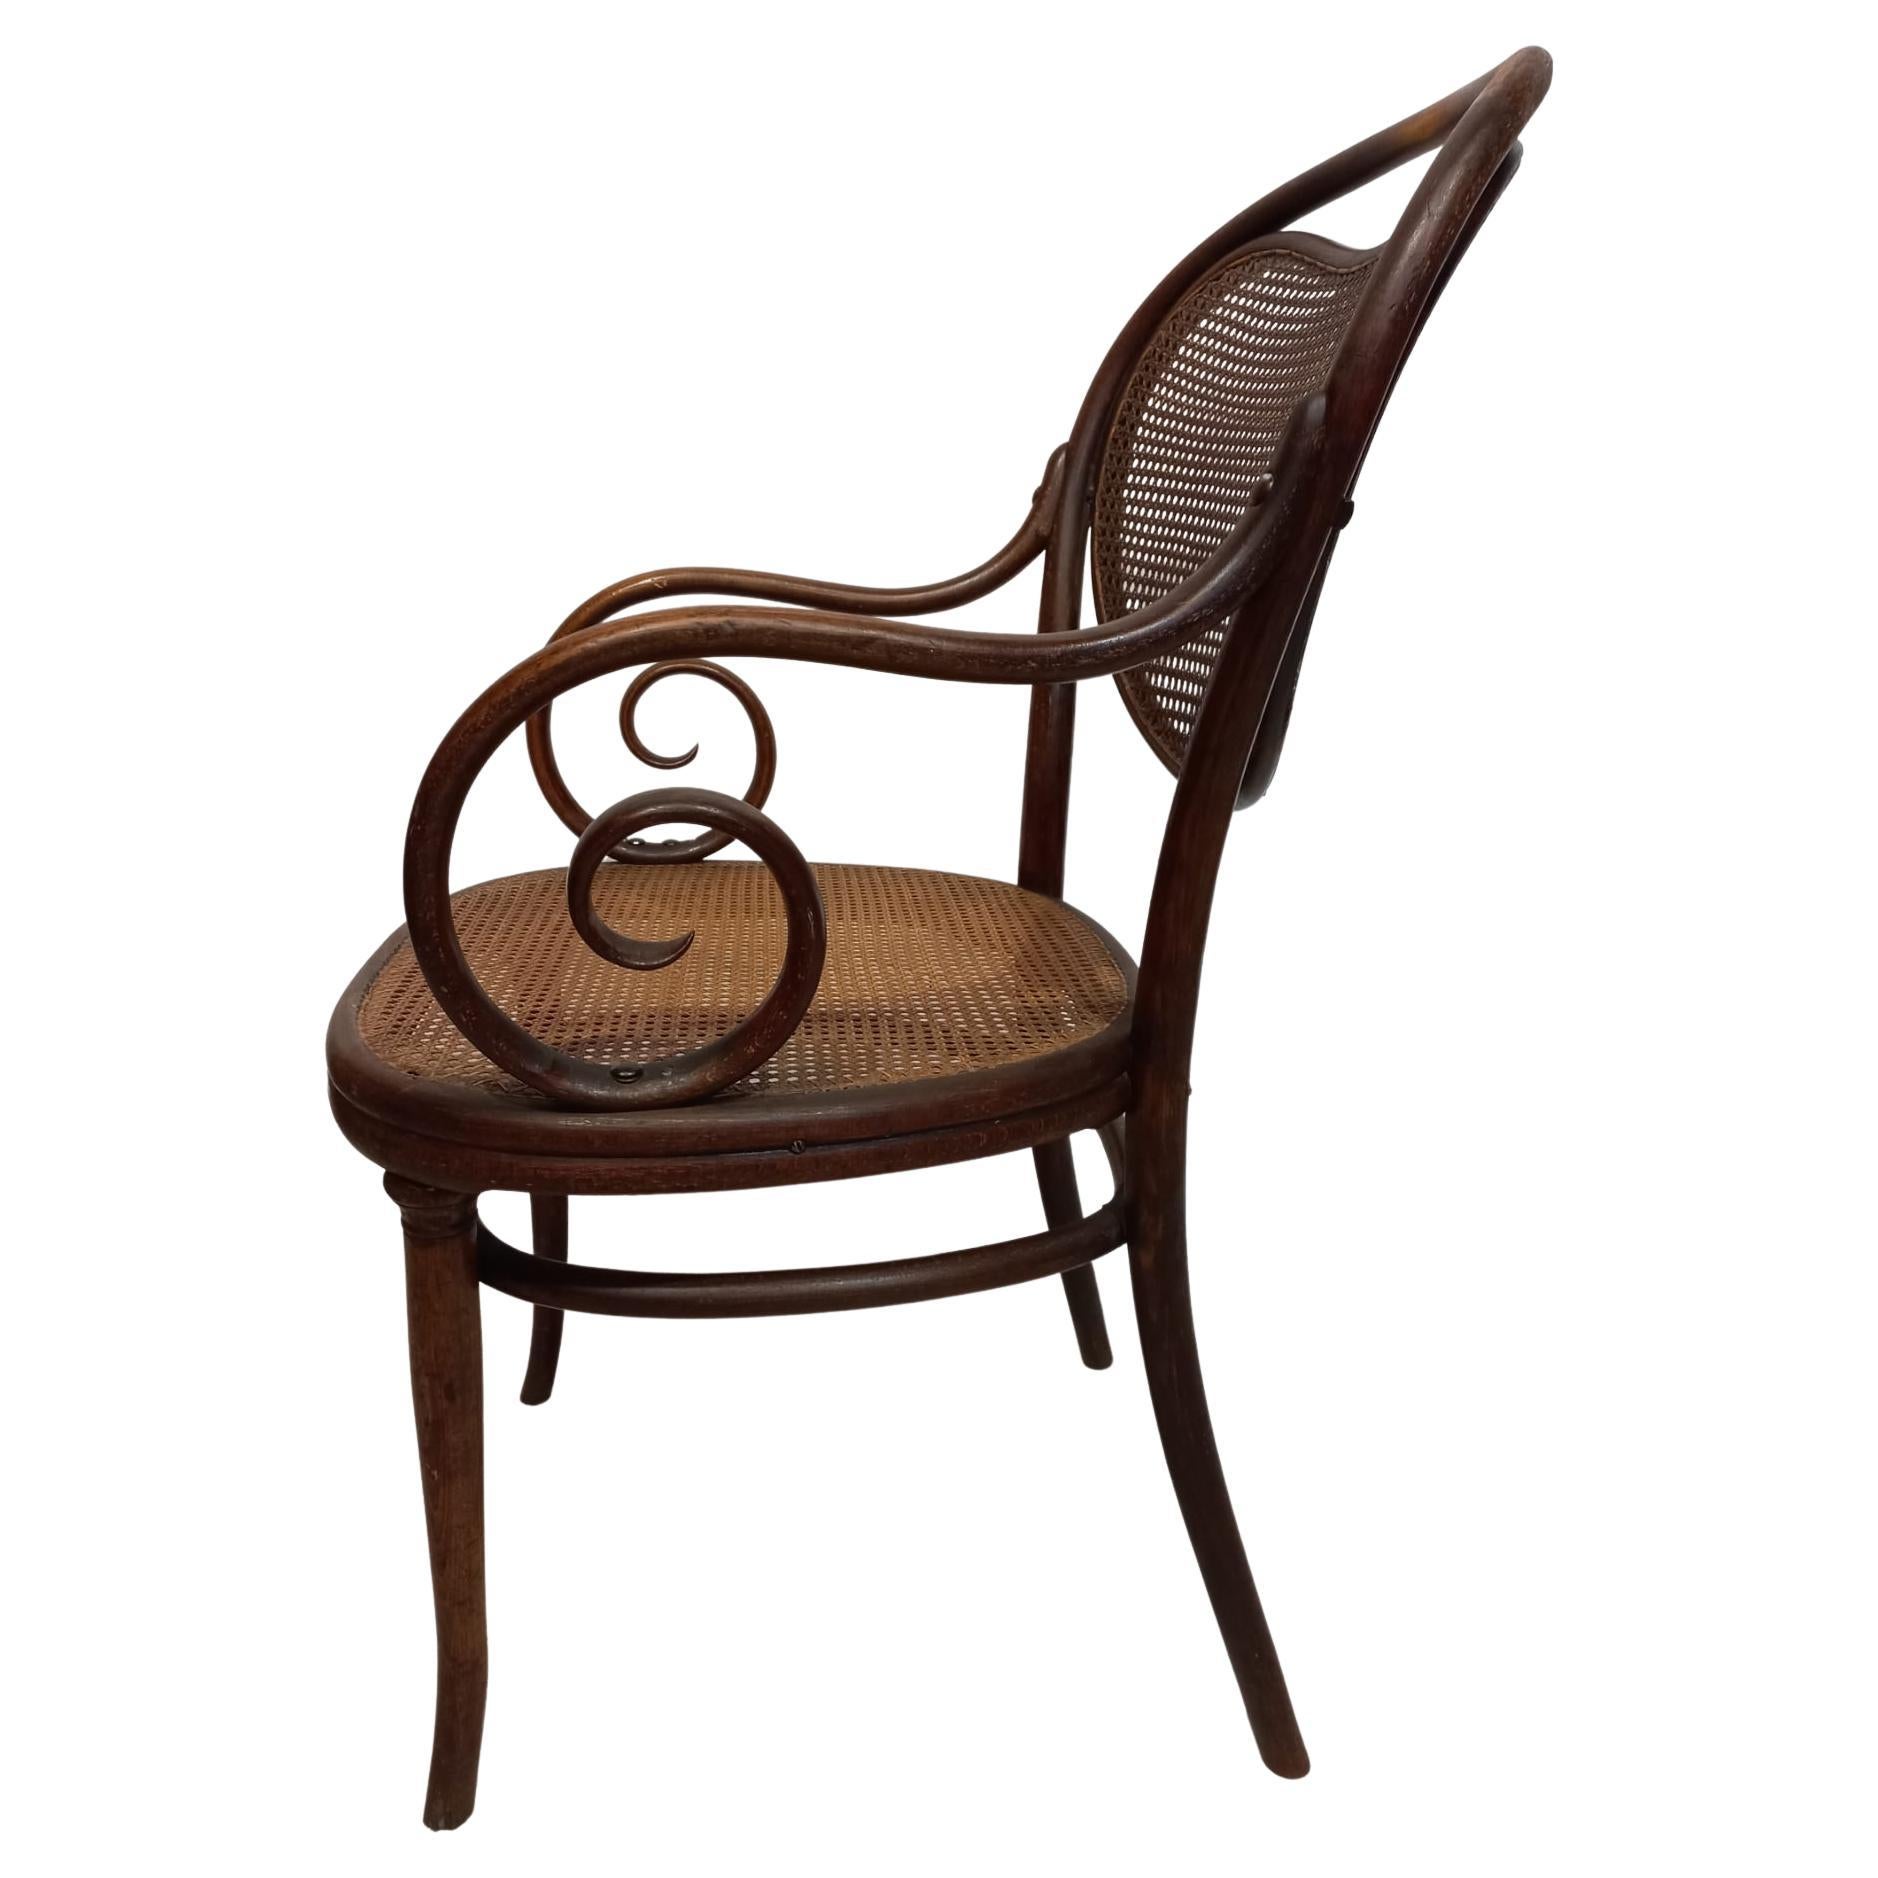 Thonet chair from the 1870s with curved armrests, Vienna Austria